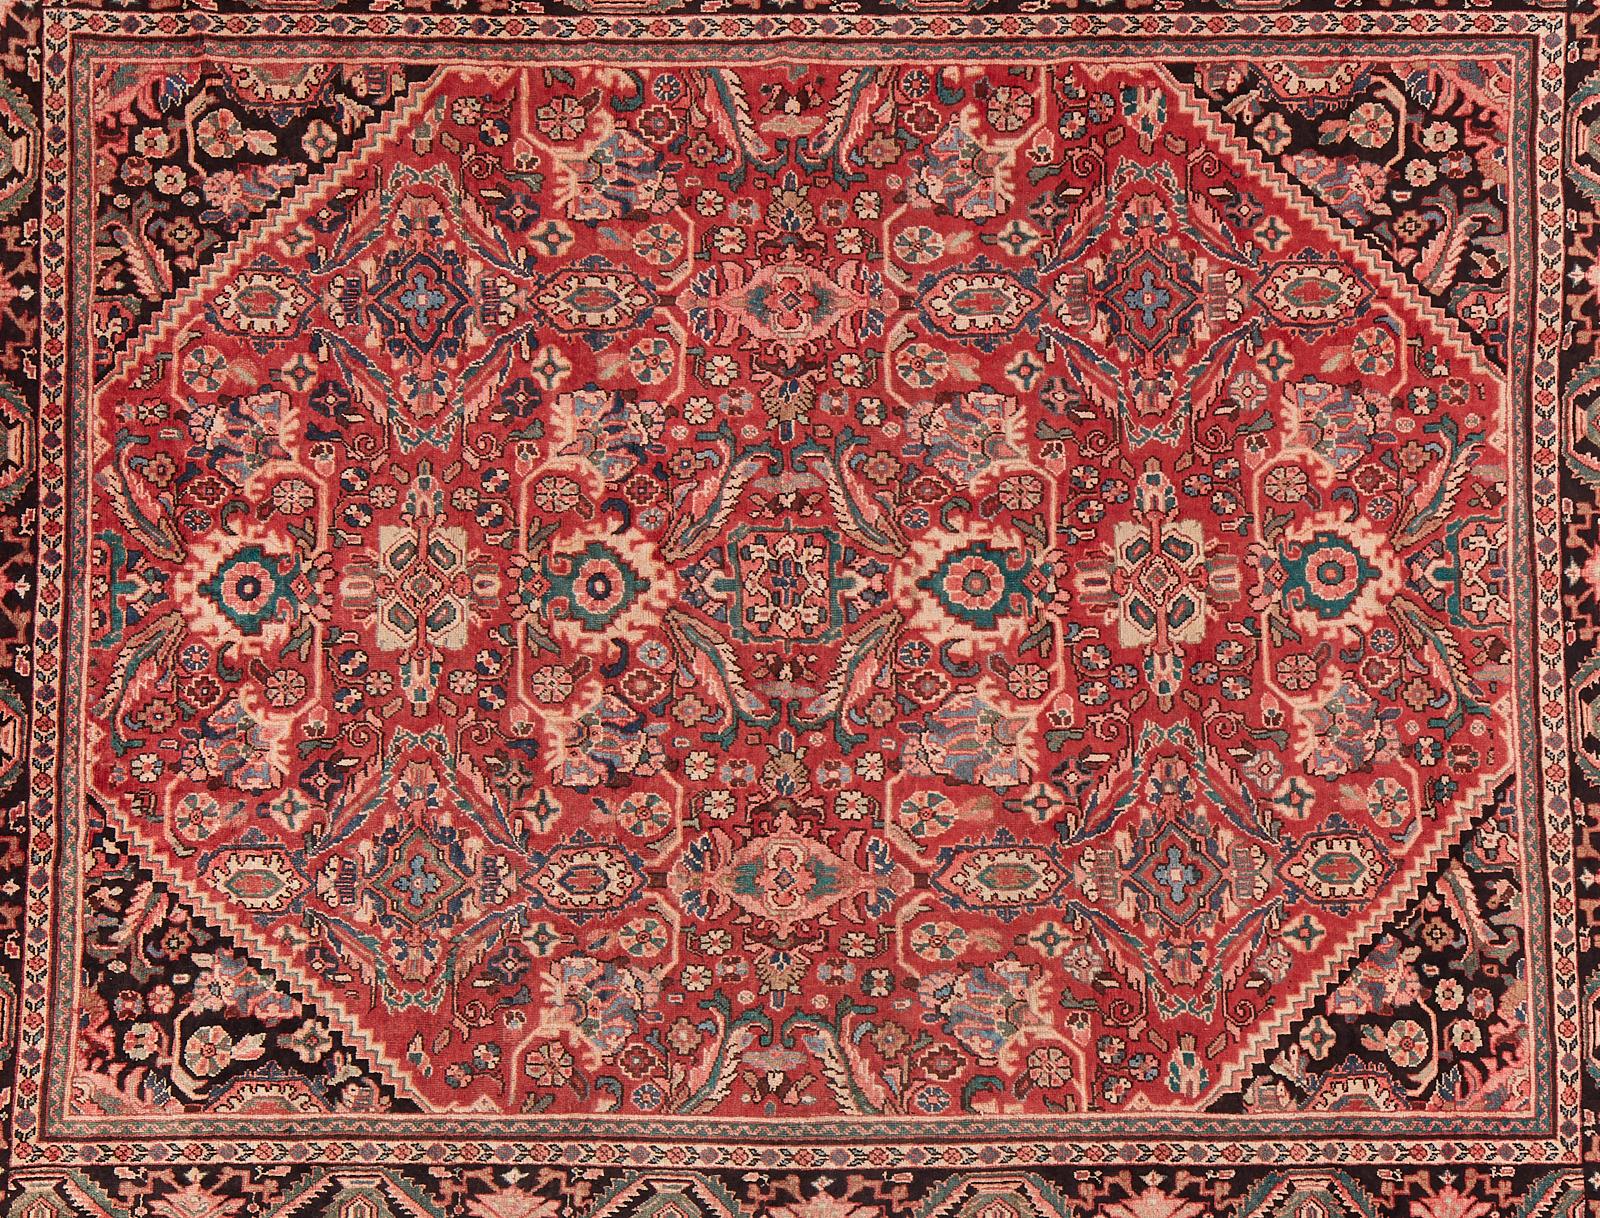 Modern vintage Persian Mahal hand-knotted wool rug featuring an intricately decorated ruby red field with triangular corners. Beautifully crafted with dazzling pinks in the floral borders. From an estate in San Francisco, CA.